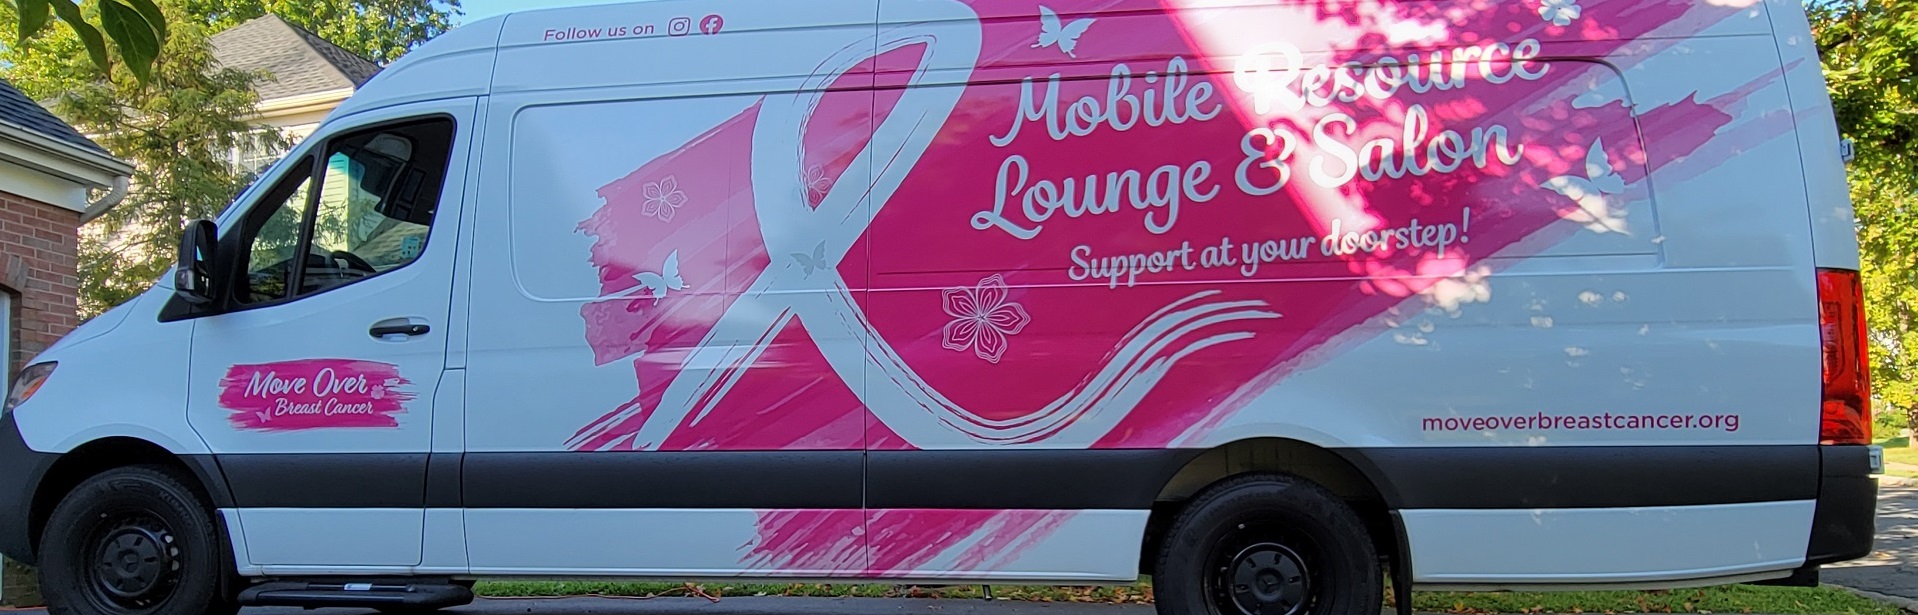 Breast cancer support<br>at your doorstep